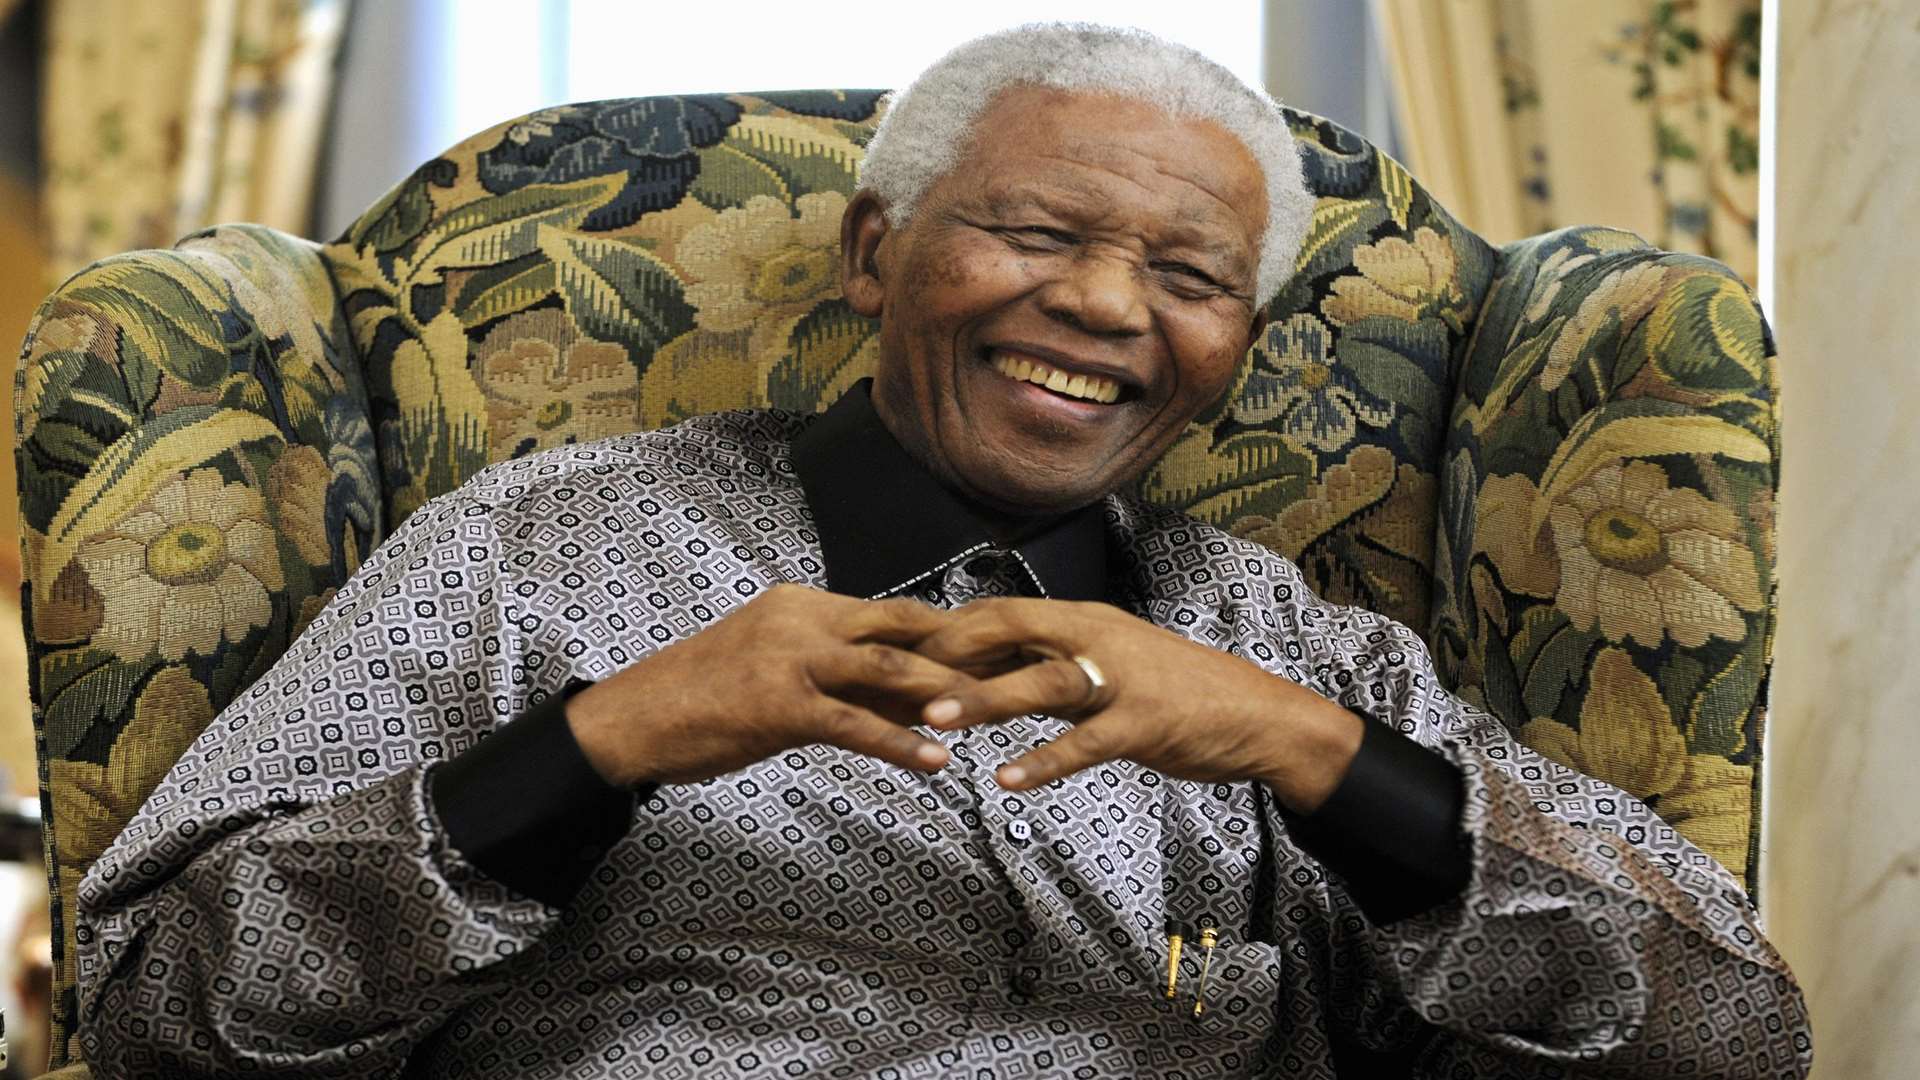 Nelson Mandela was awarded more than 250 honours, including the Nobel Peace Prize